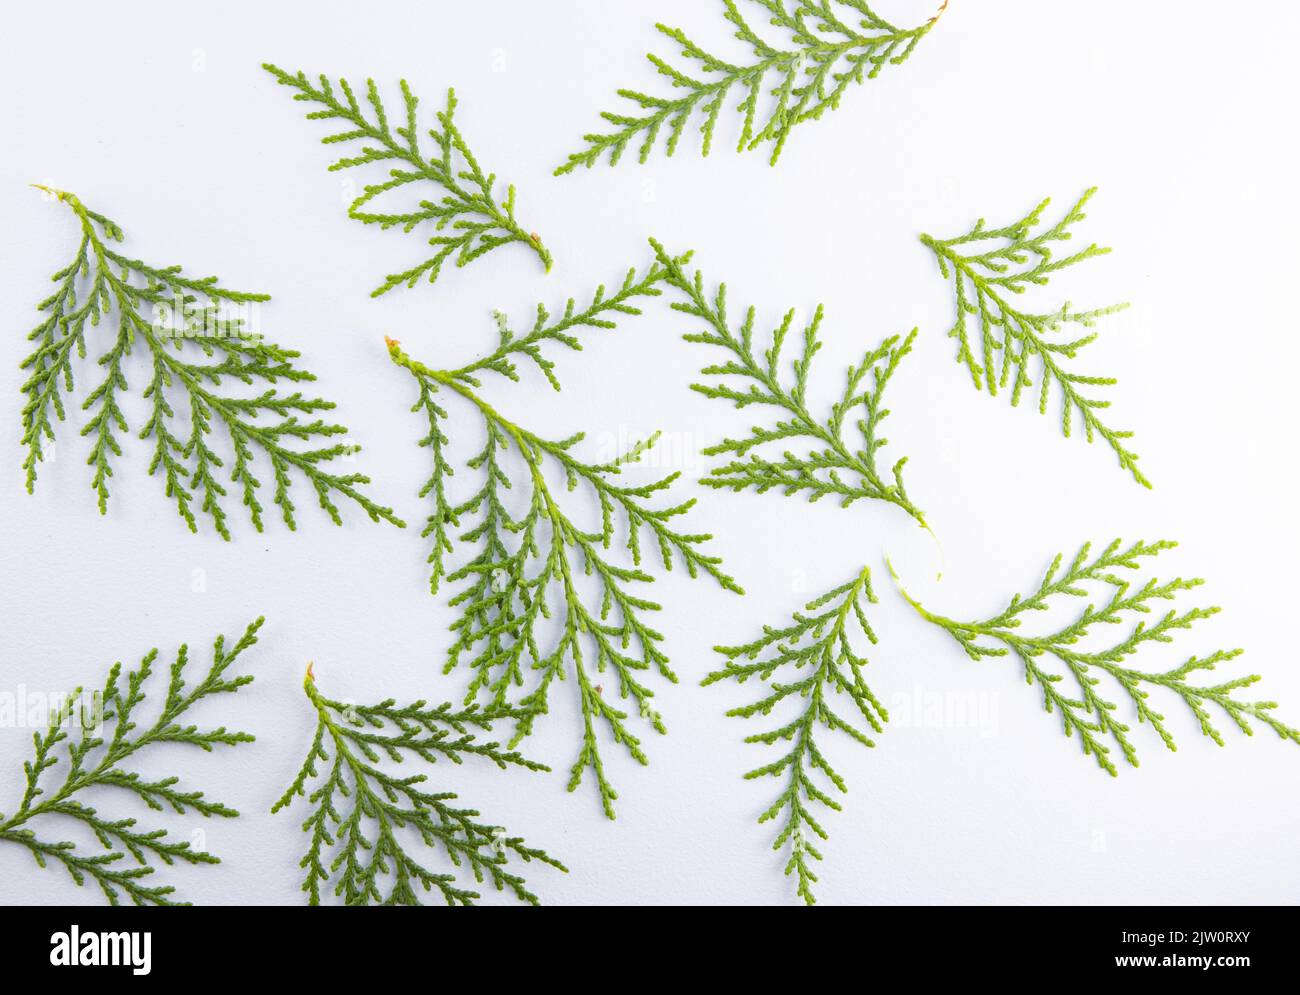 Branch of green thuja, collection thuja on a white background Stock Photo